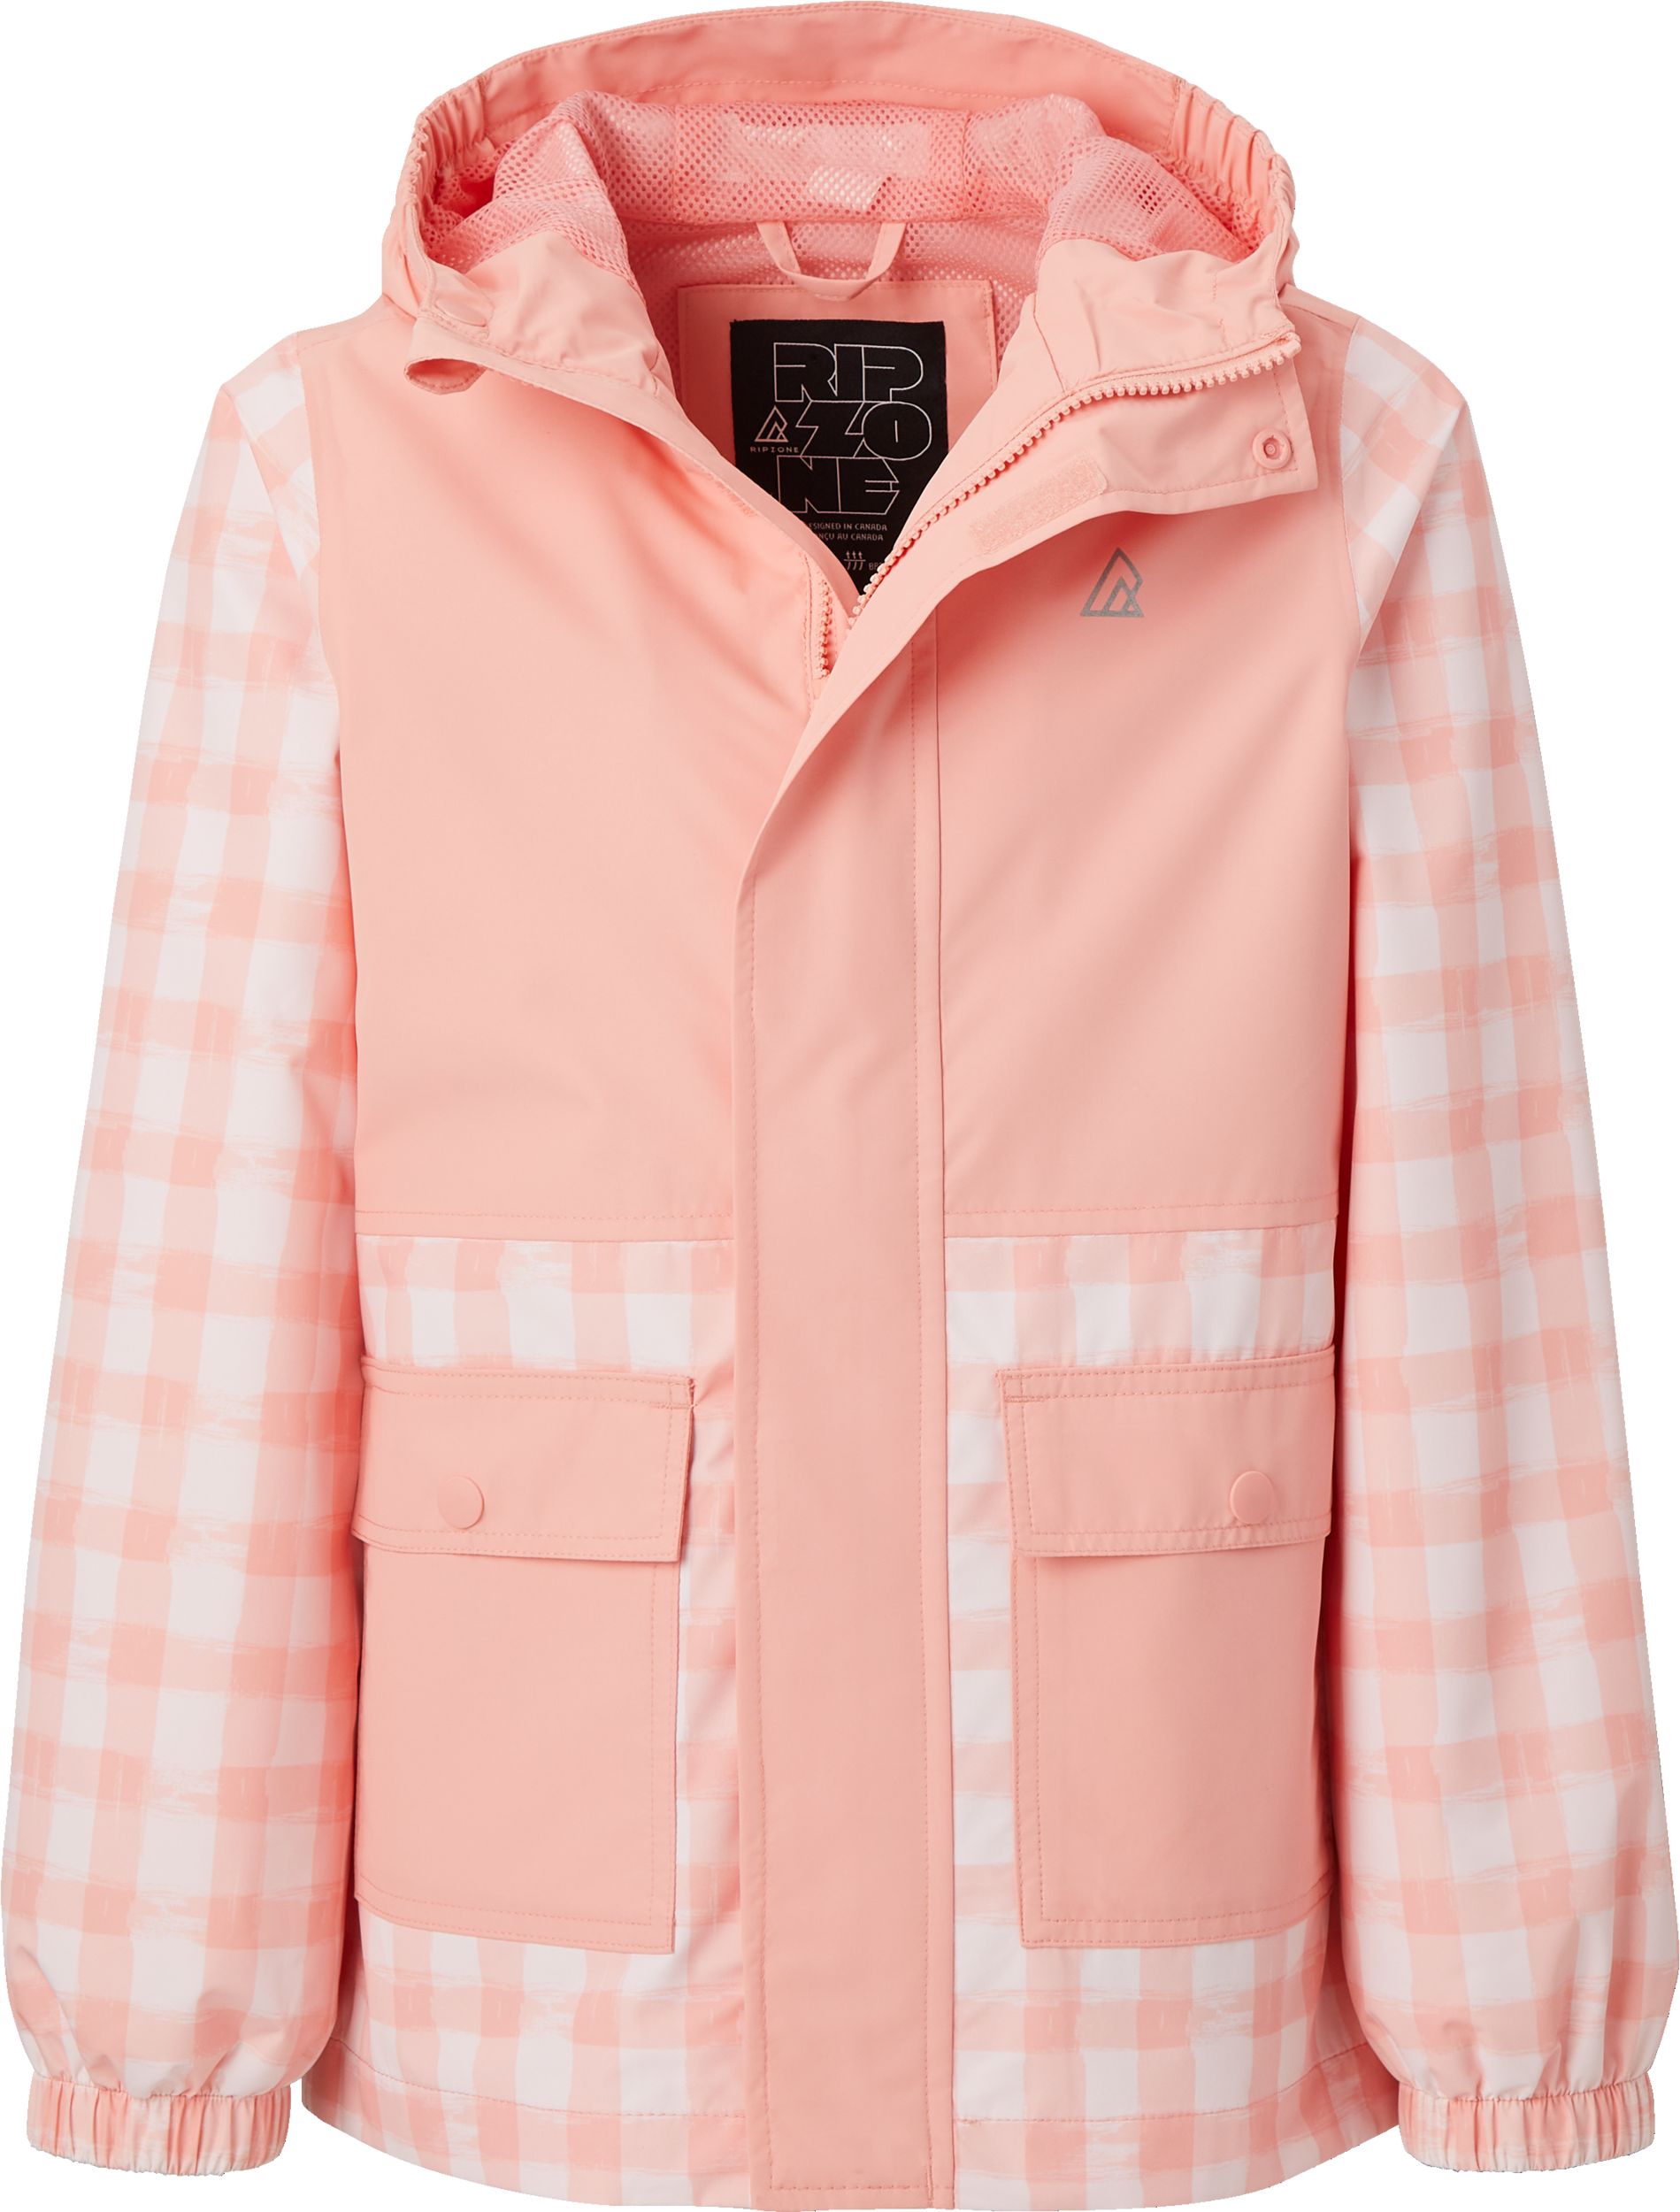 Image of Ripzone Girls' Burnaby Water Resistant Jacket